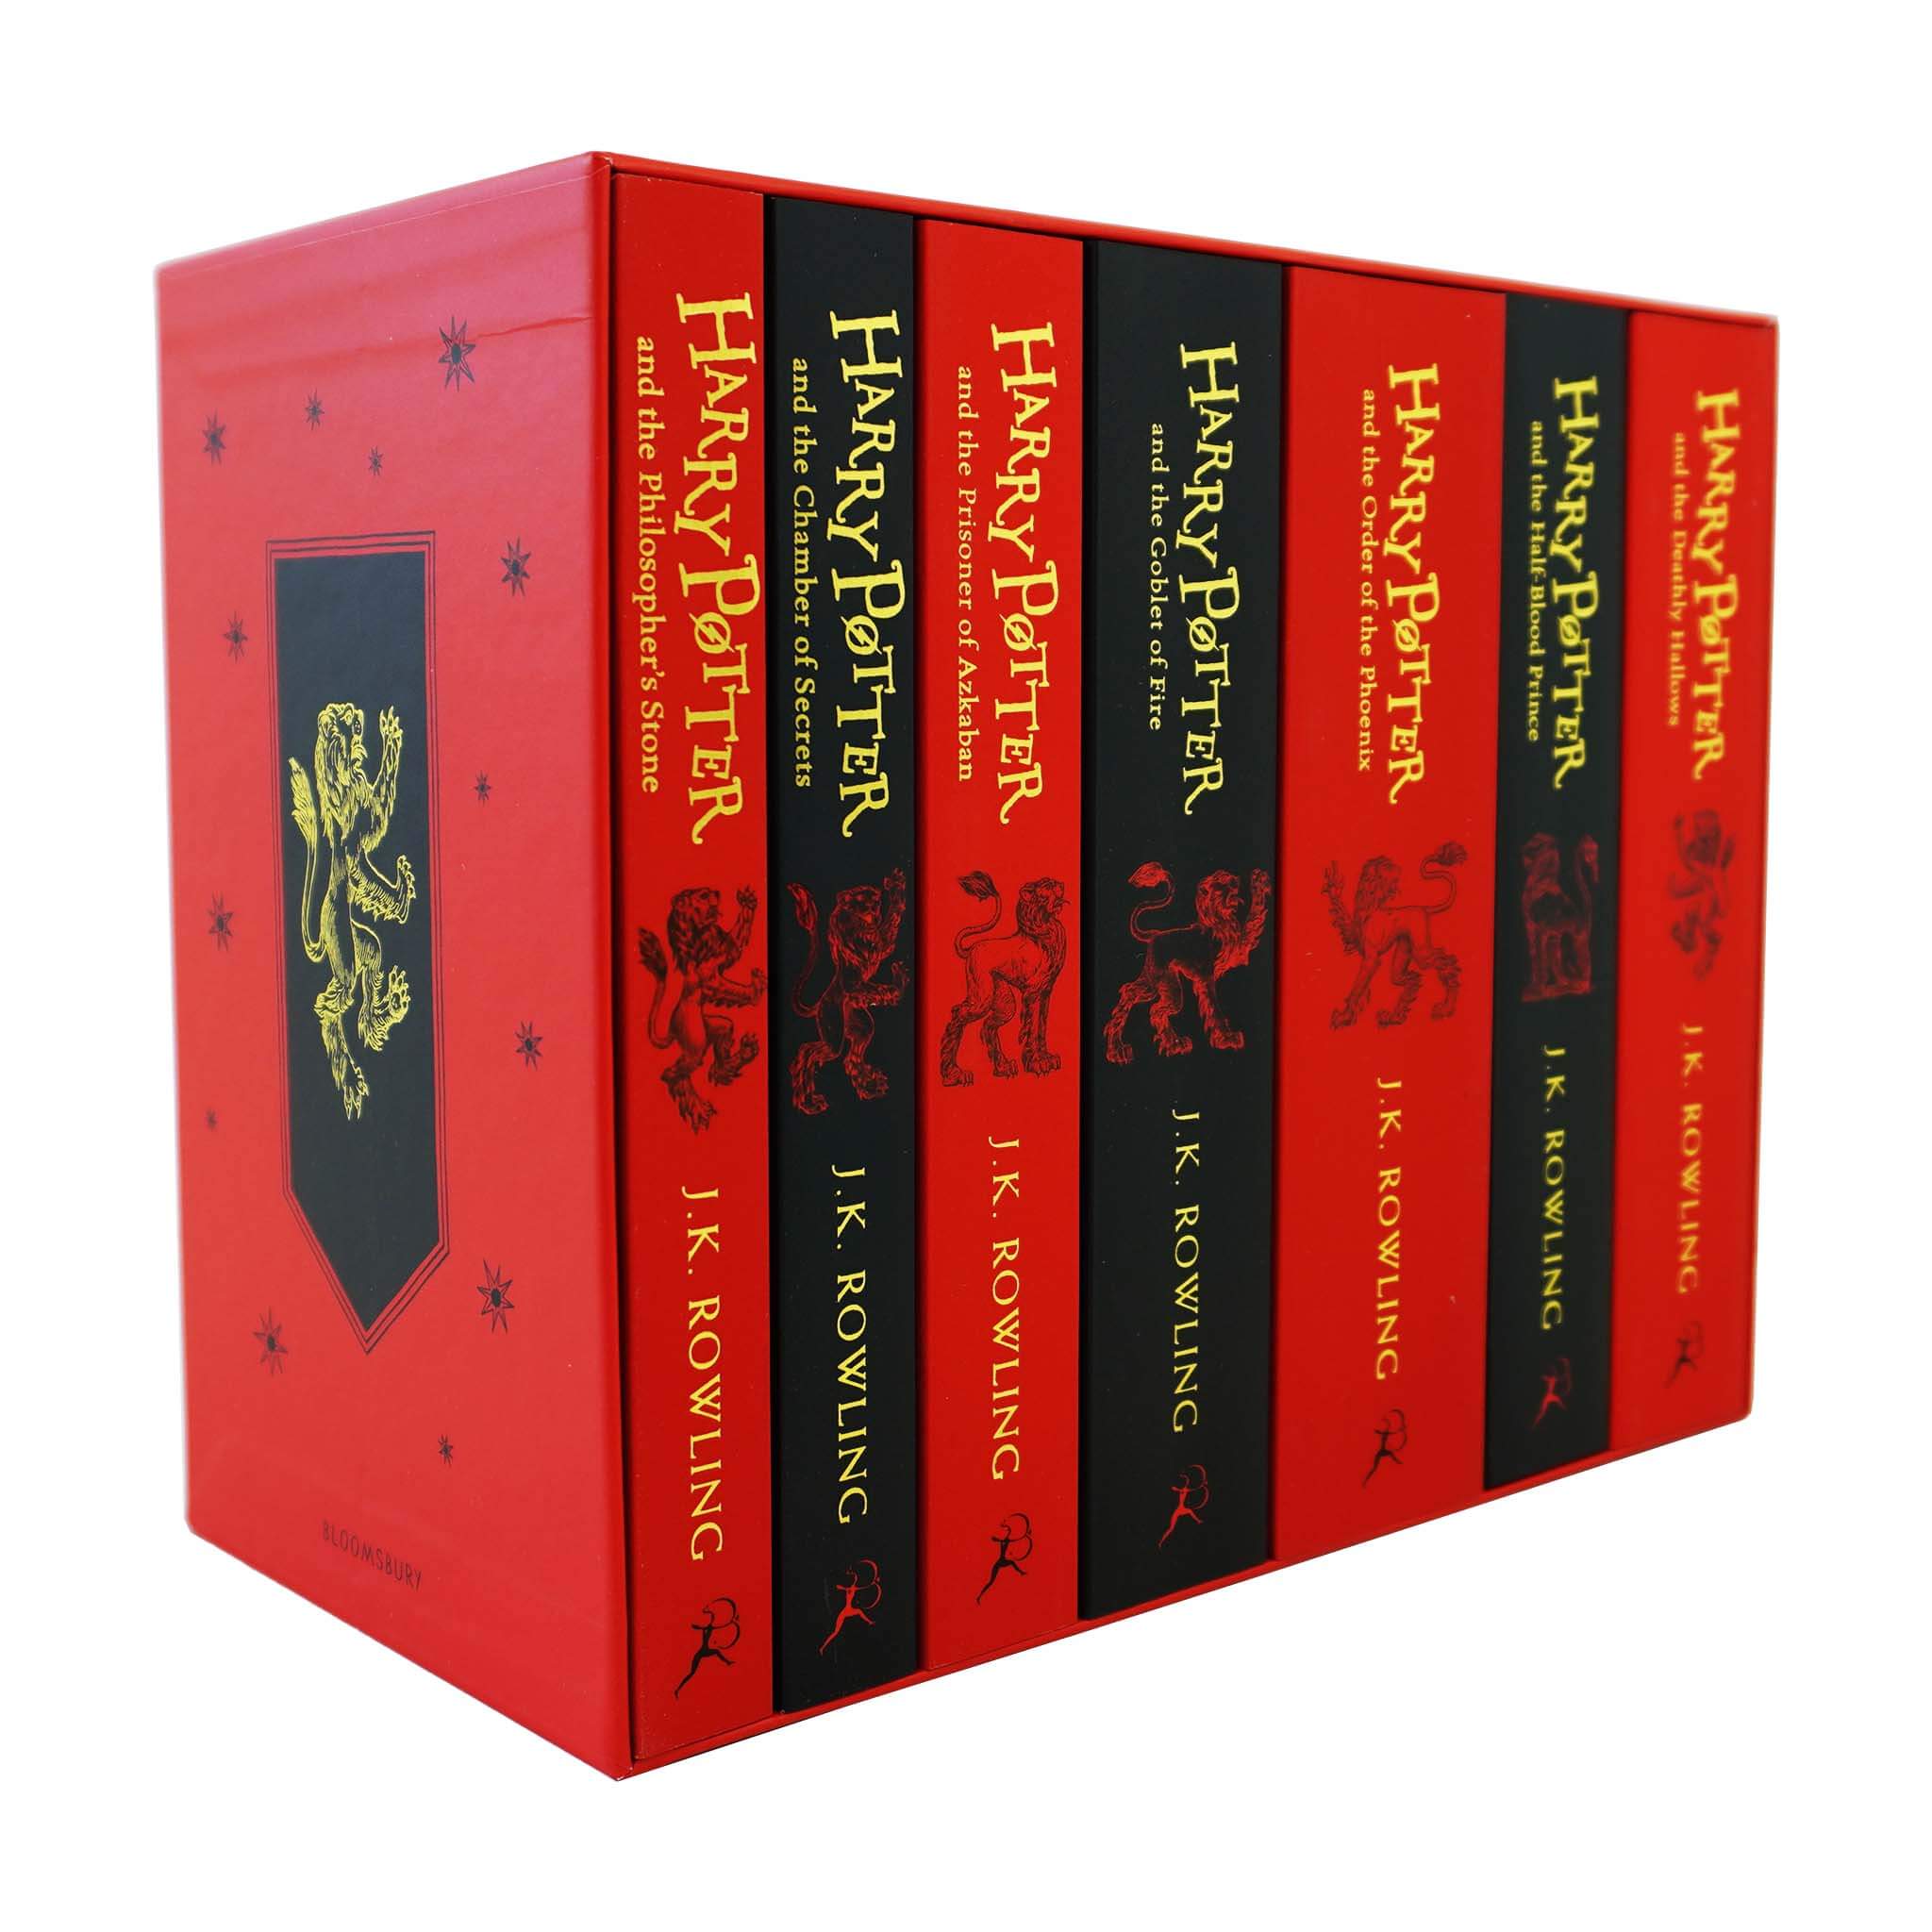 Harry Potter Gryffindor House Editions 7 Books Set: Rowling J.K.